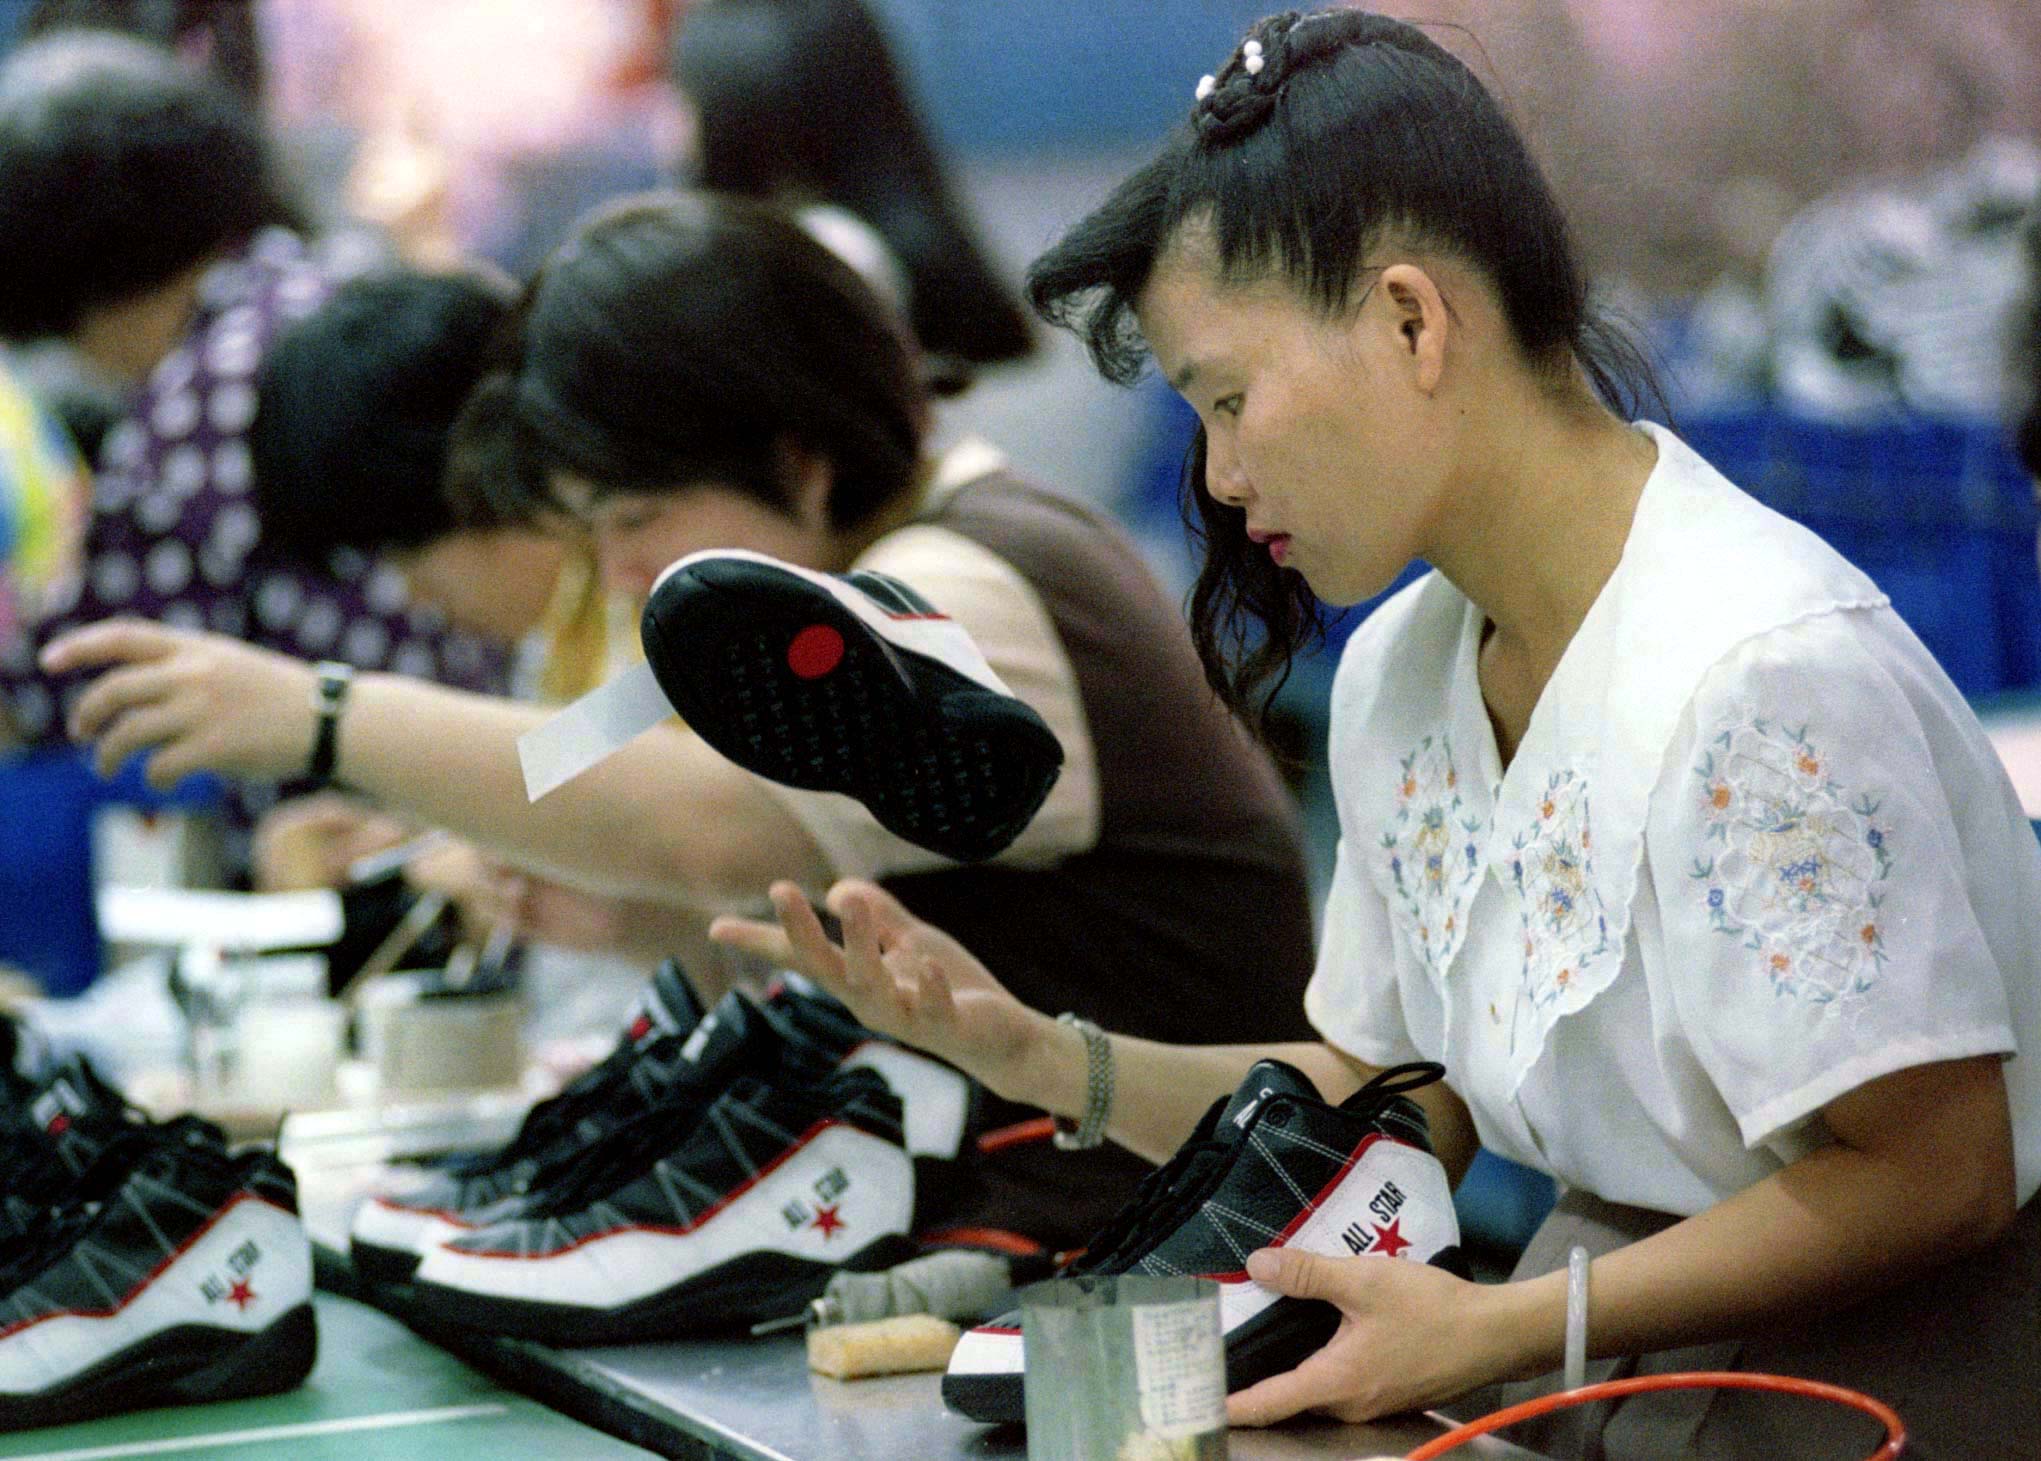 A production line worker inspects a sportshoe at the Pou Chen International Group's factory in centr..